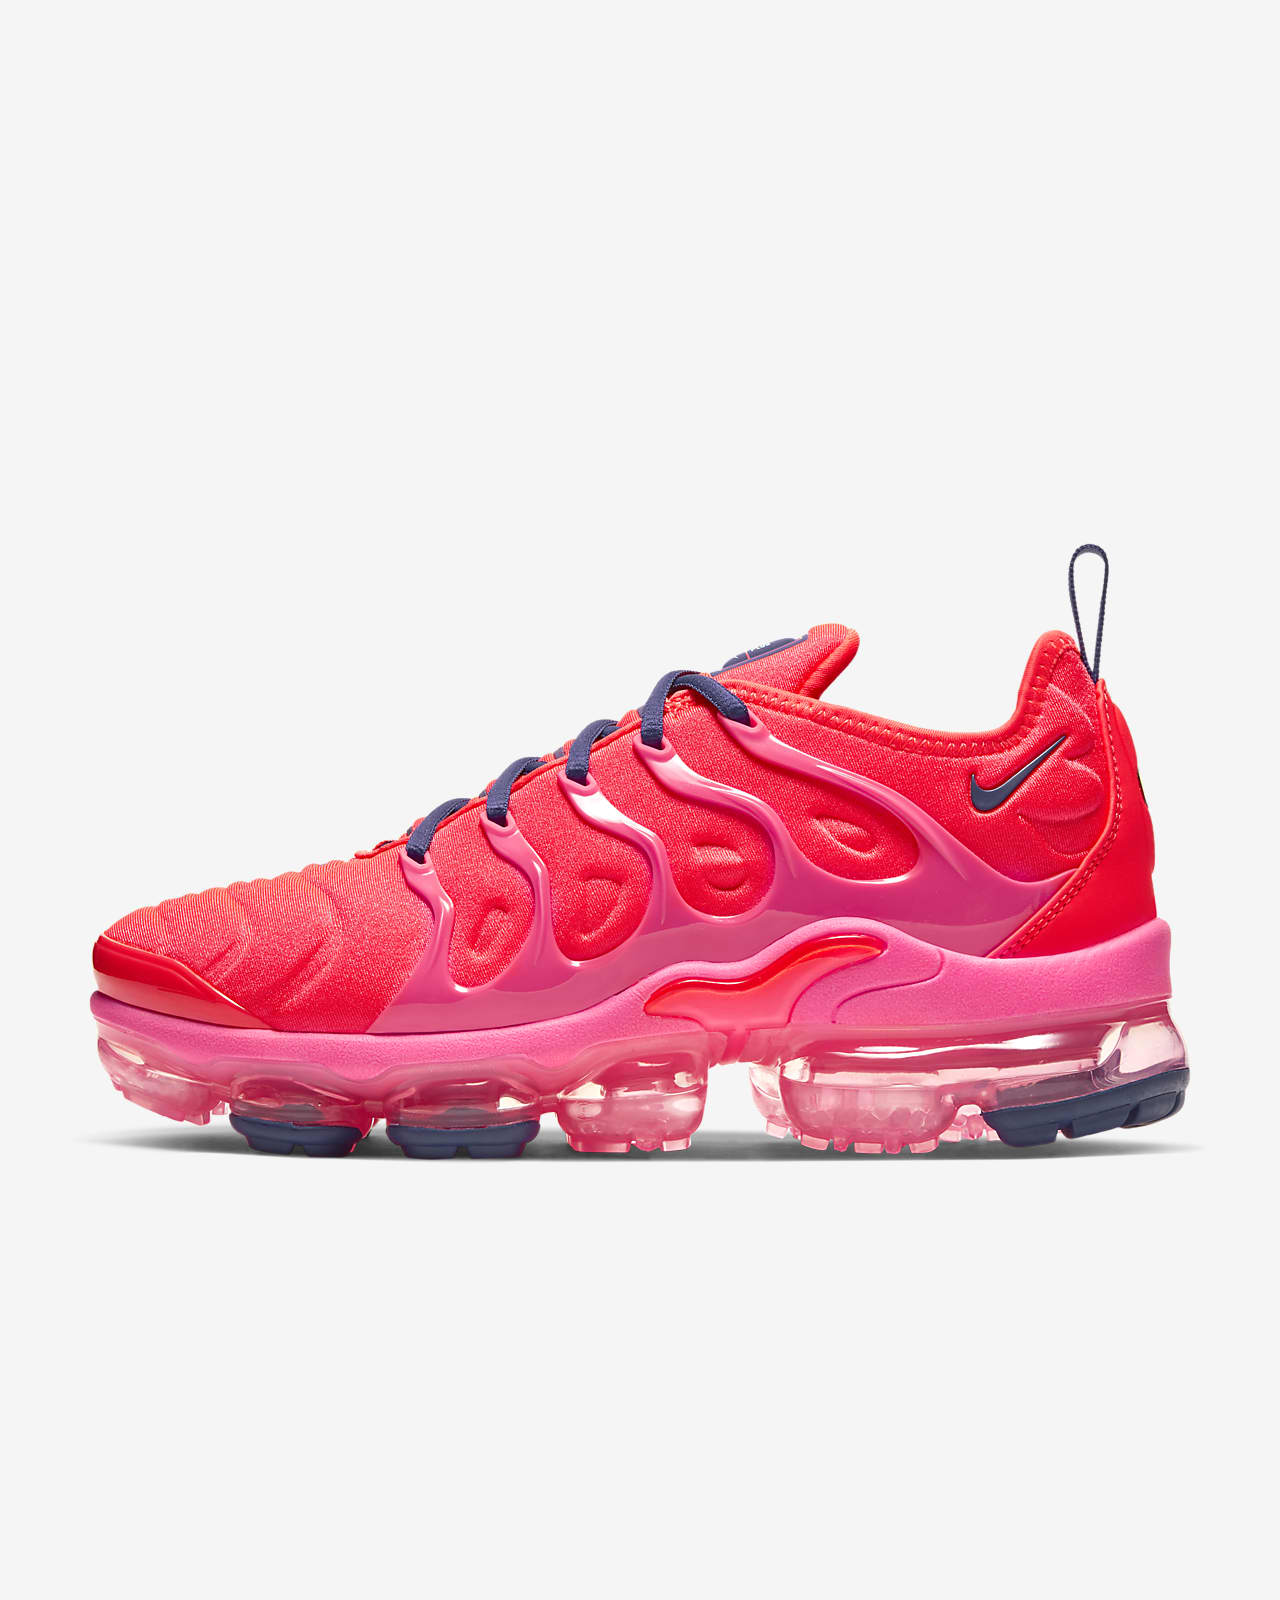 pink and green vapormax plus